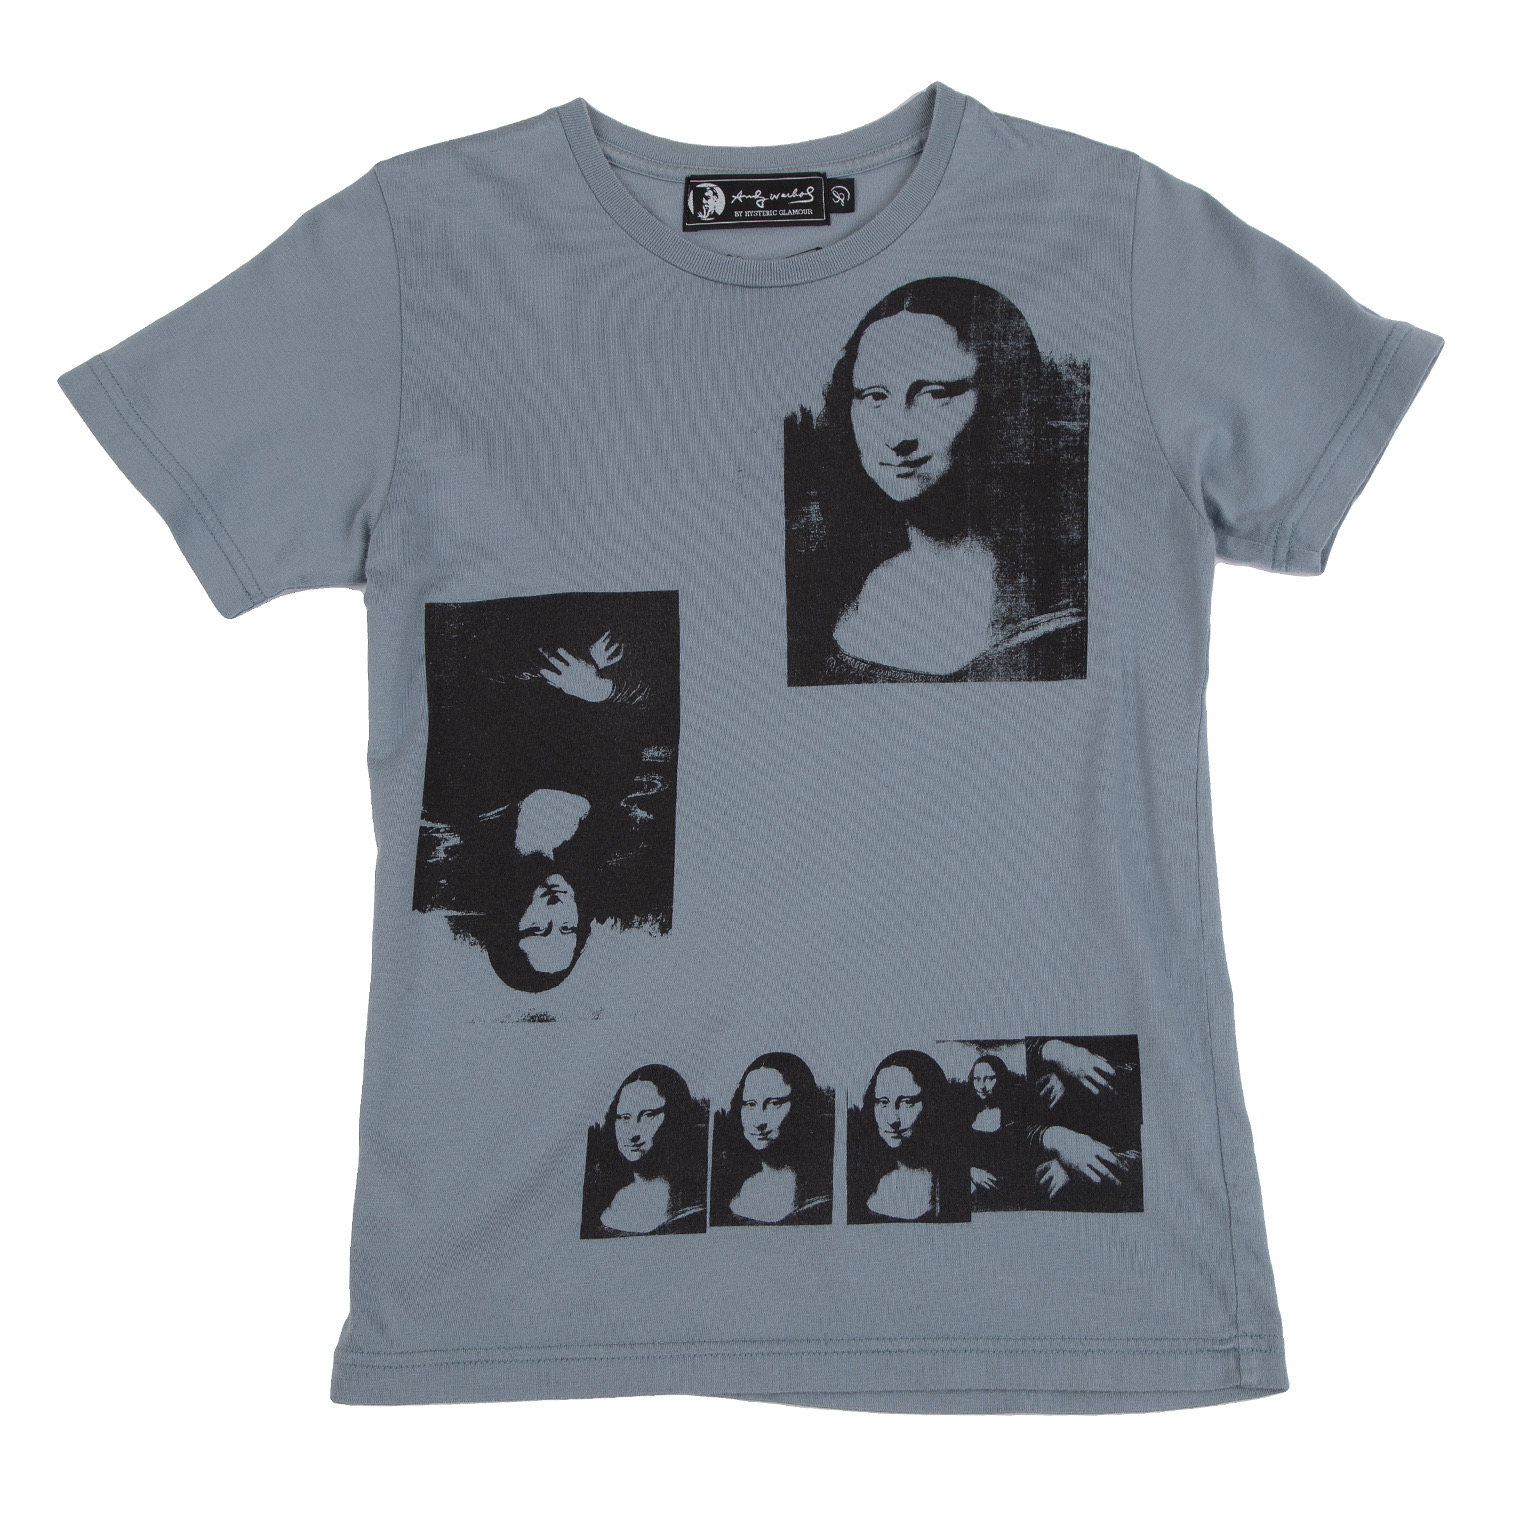 Andy Warhol BY HYSTERIC GLAMOUR M